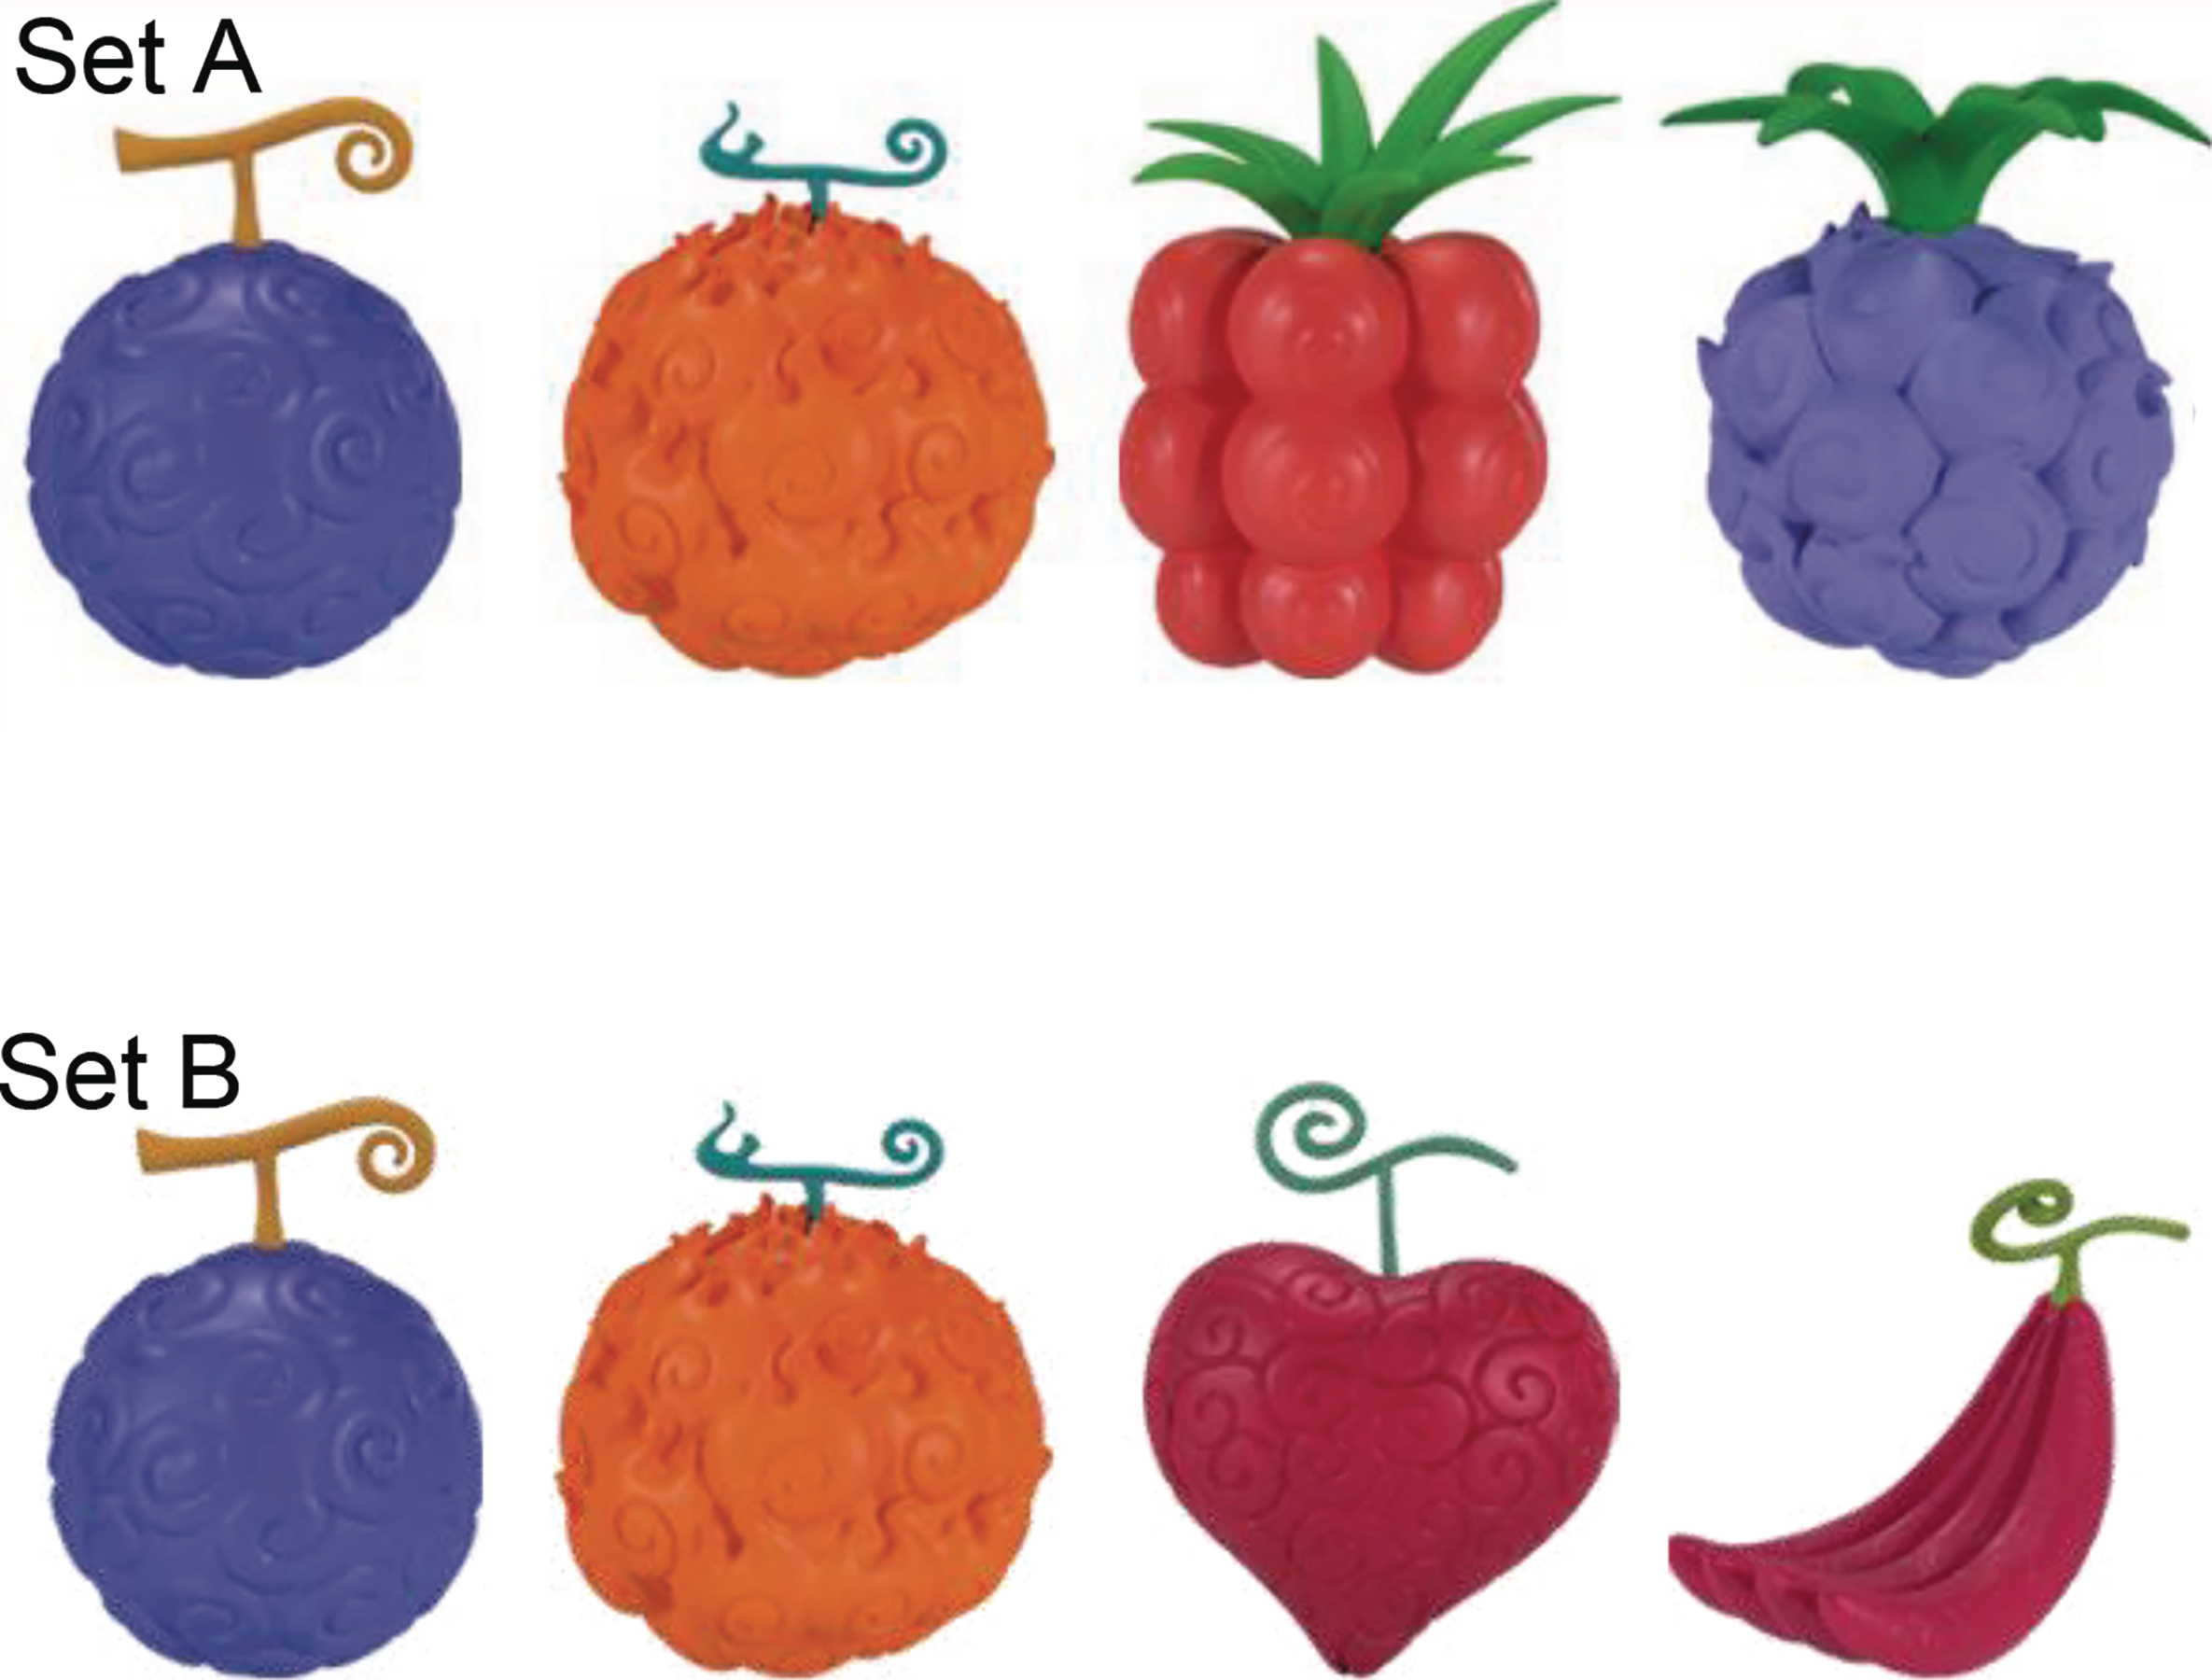 all one piece fruits